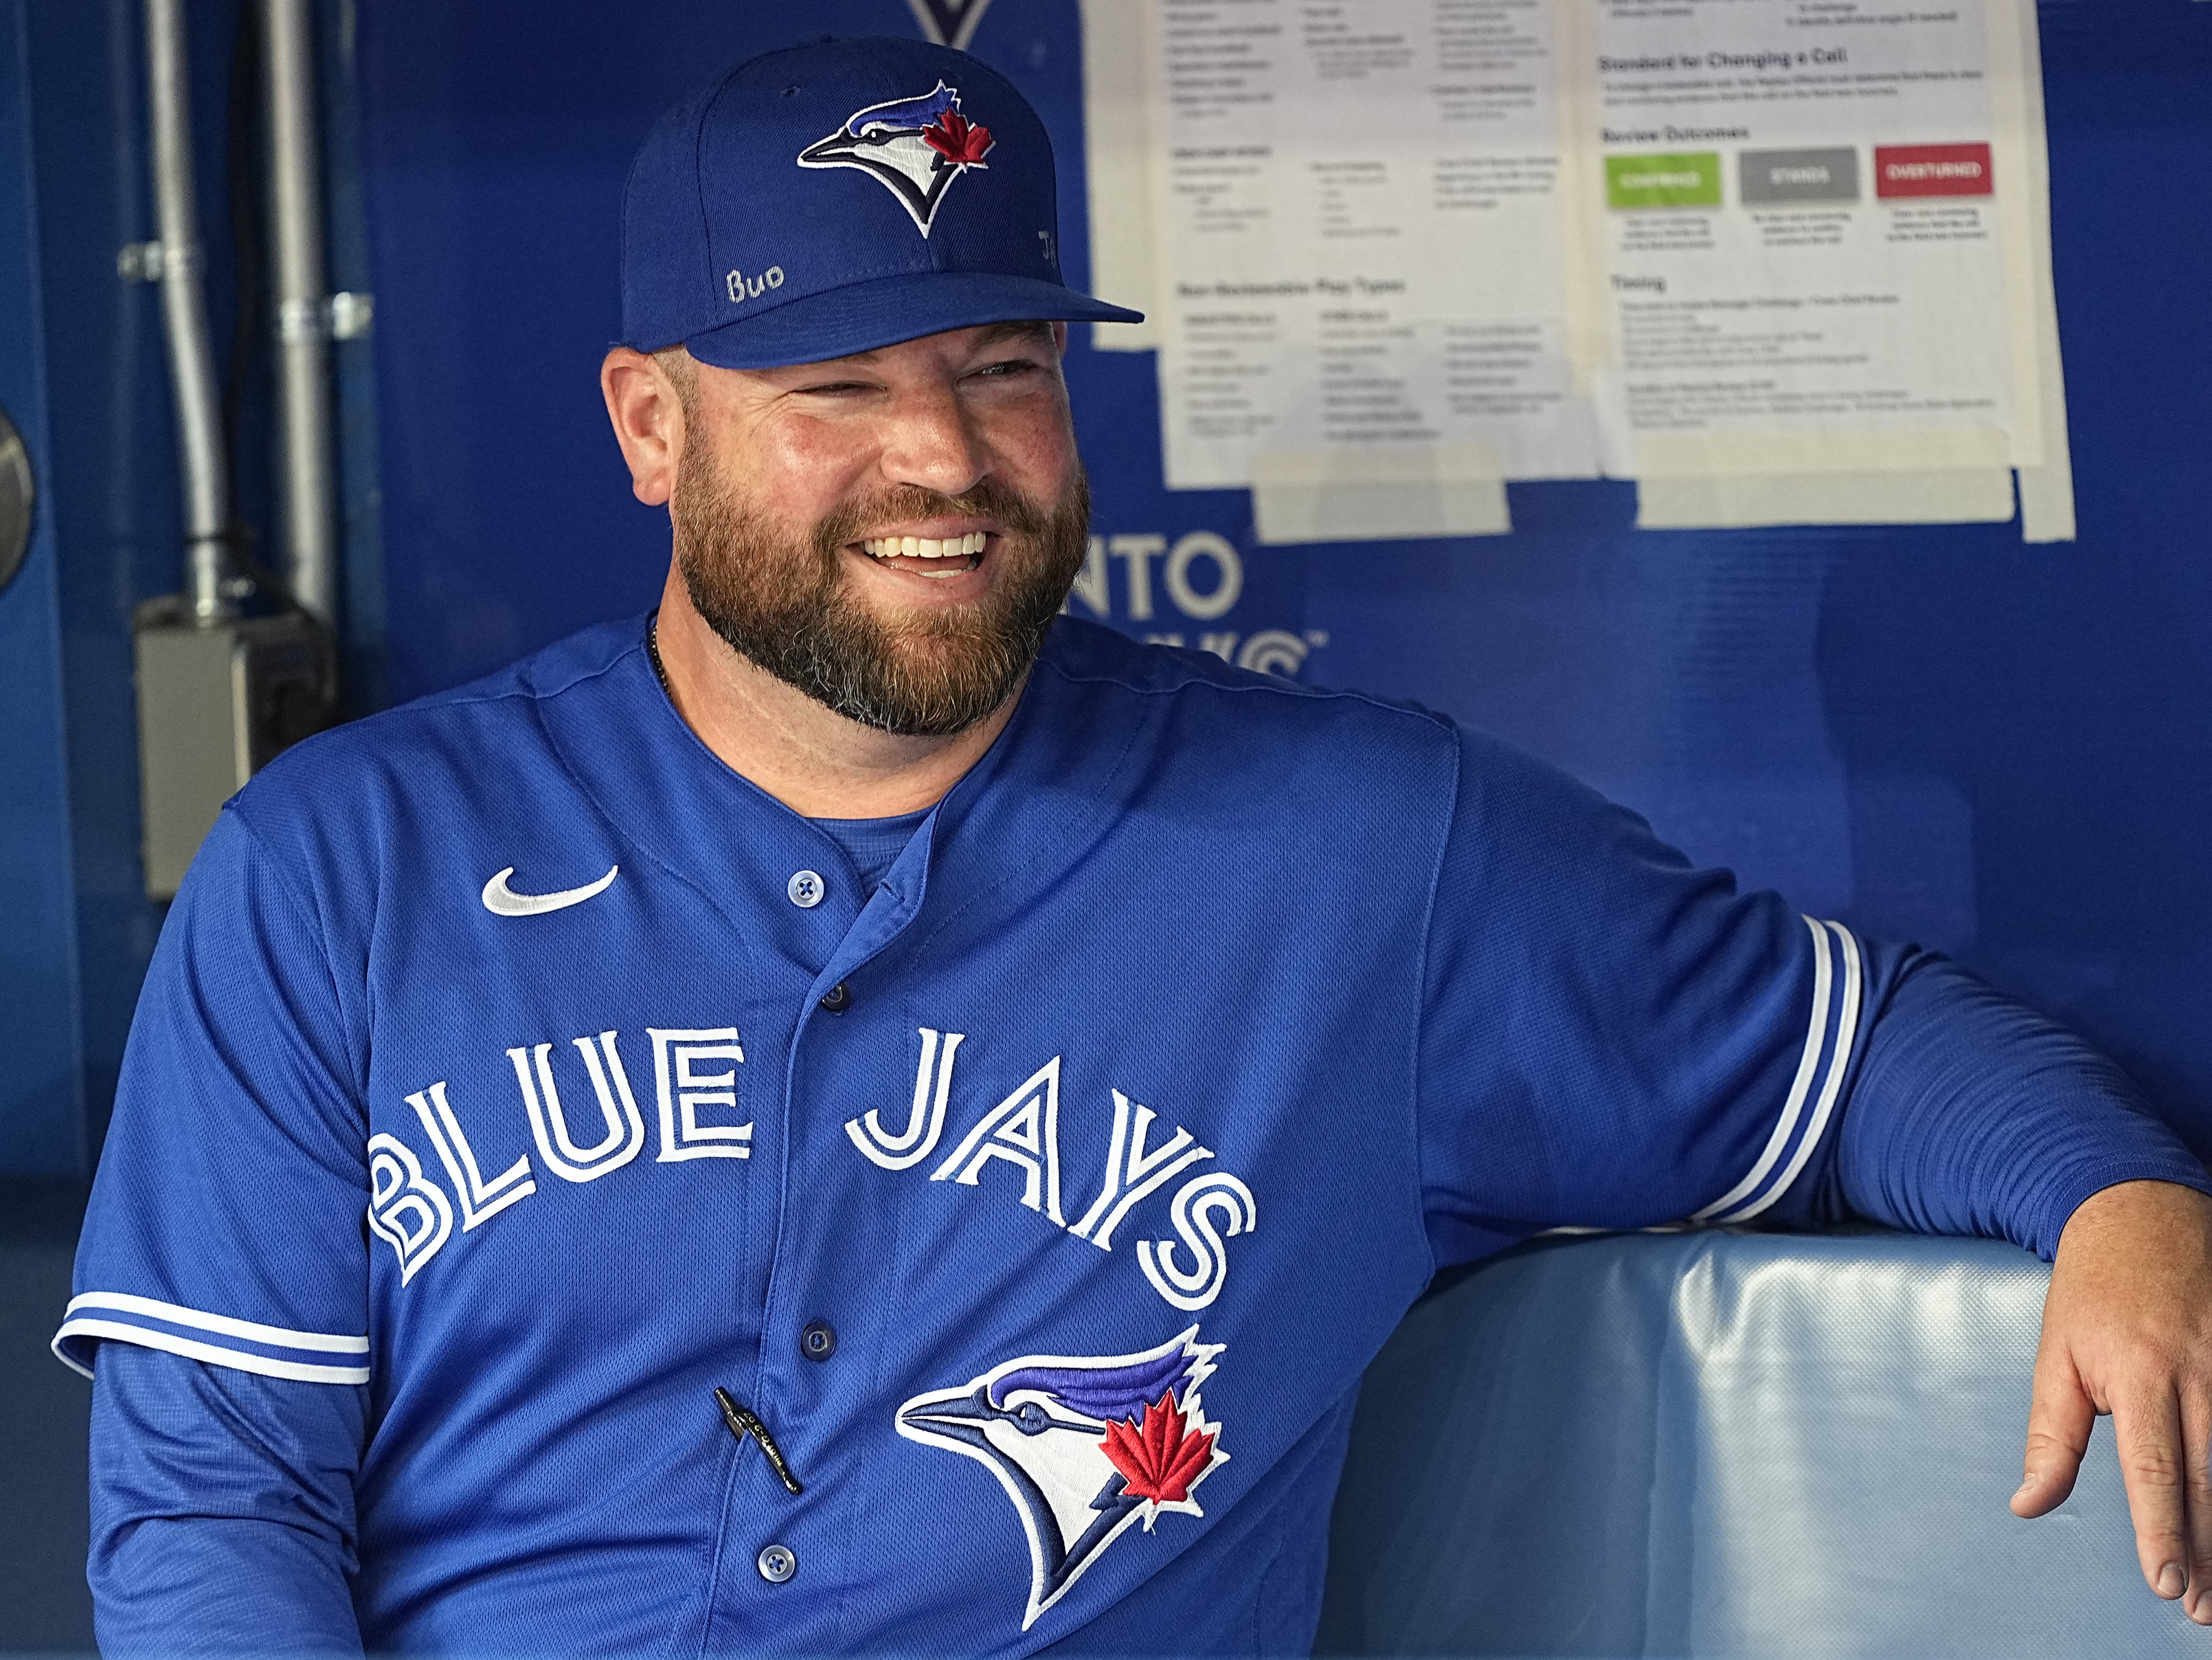 With Blue Jays in the playoffs, John Schneider's big moment has